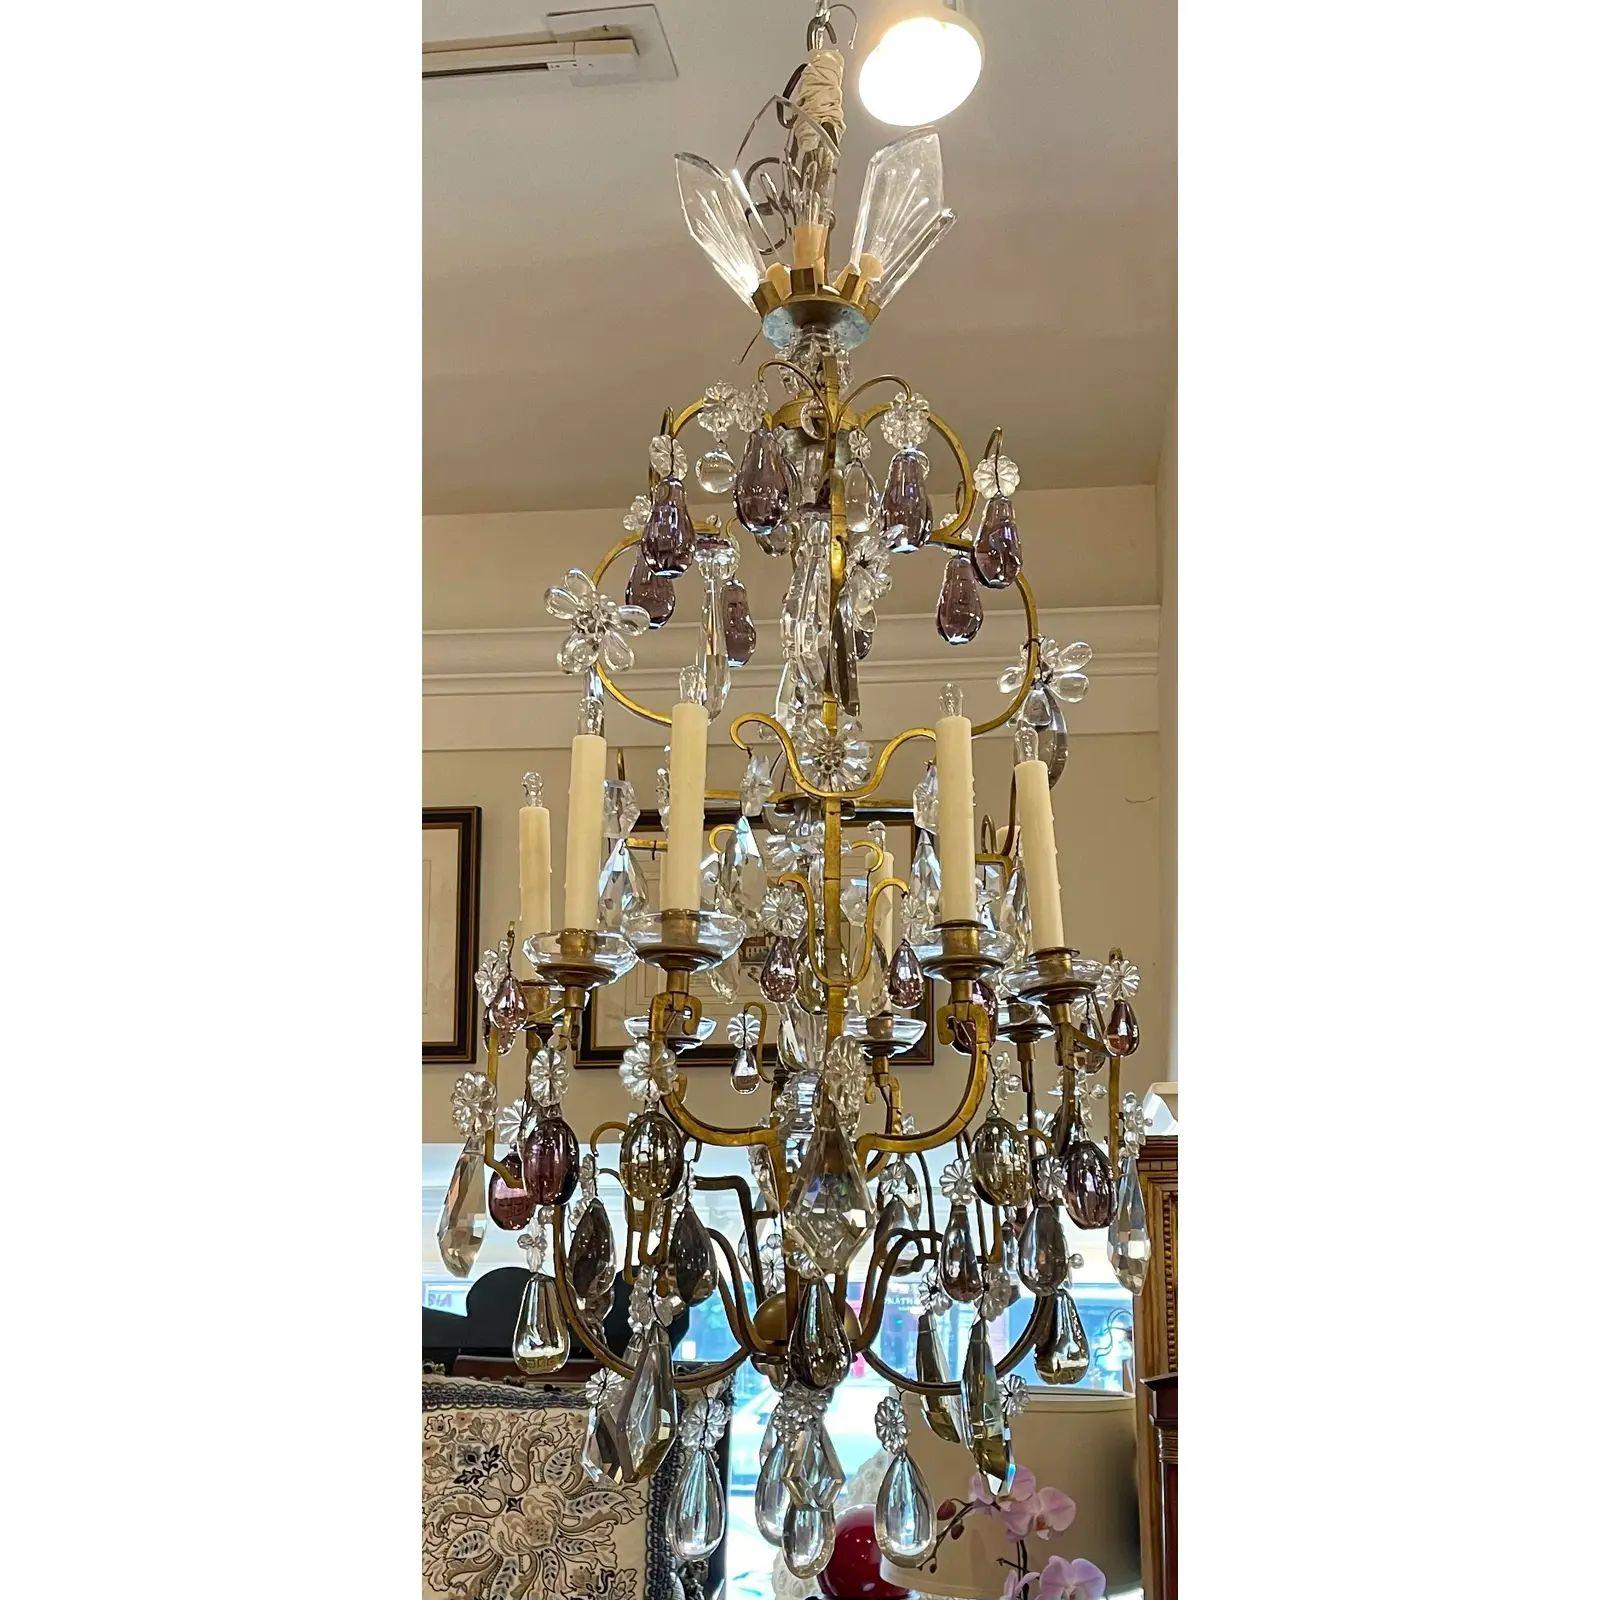 Antique Italian Rock Crystal Chandelier with Purple Fruit, 19th Century For Sale 2